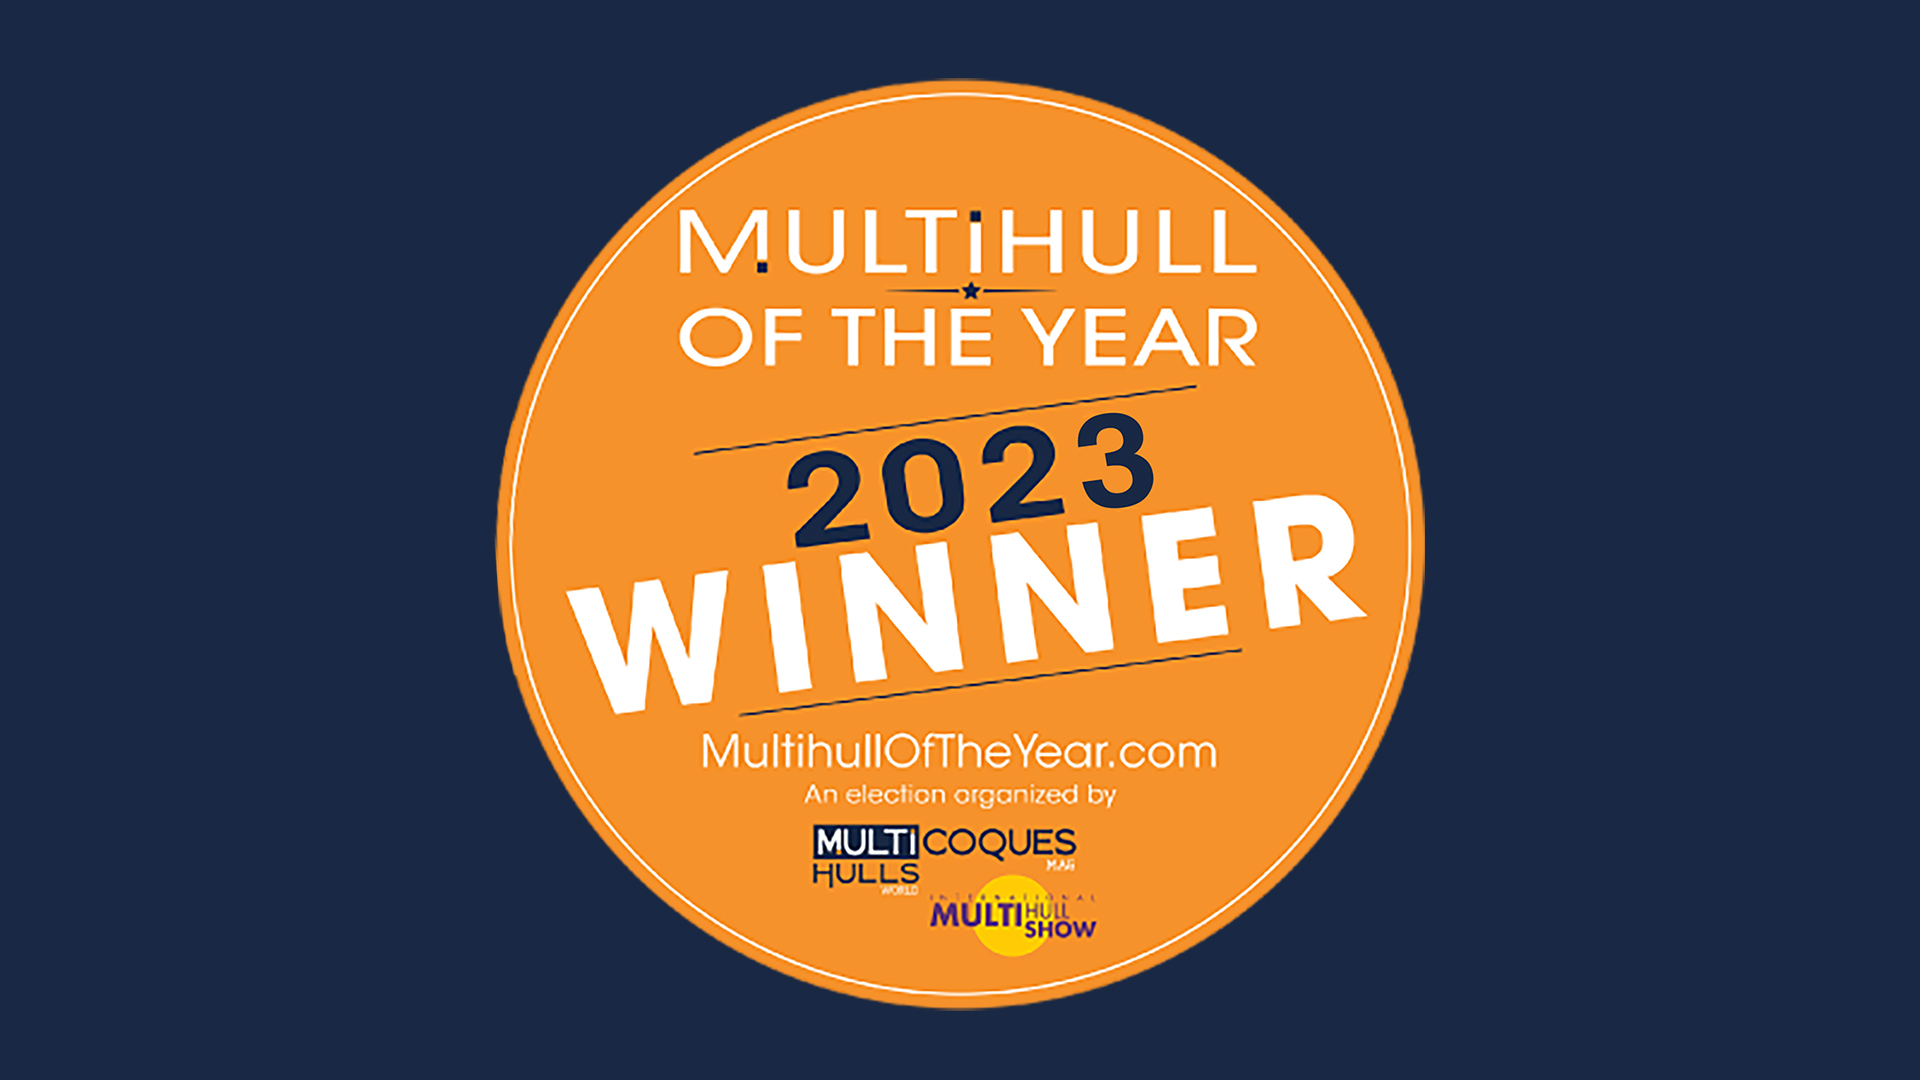 The winners of the “2023 Multihull of the Year” awards have been announced!